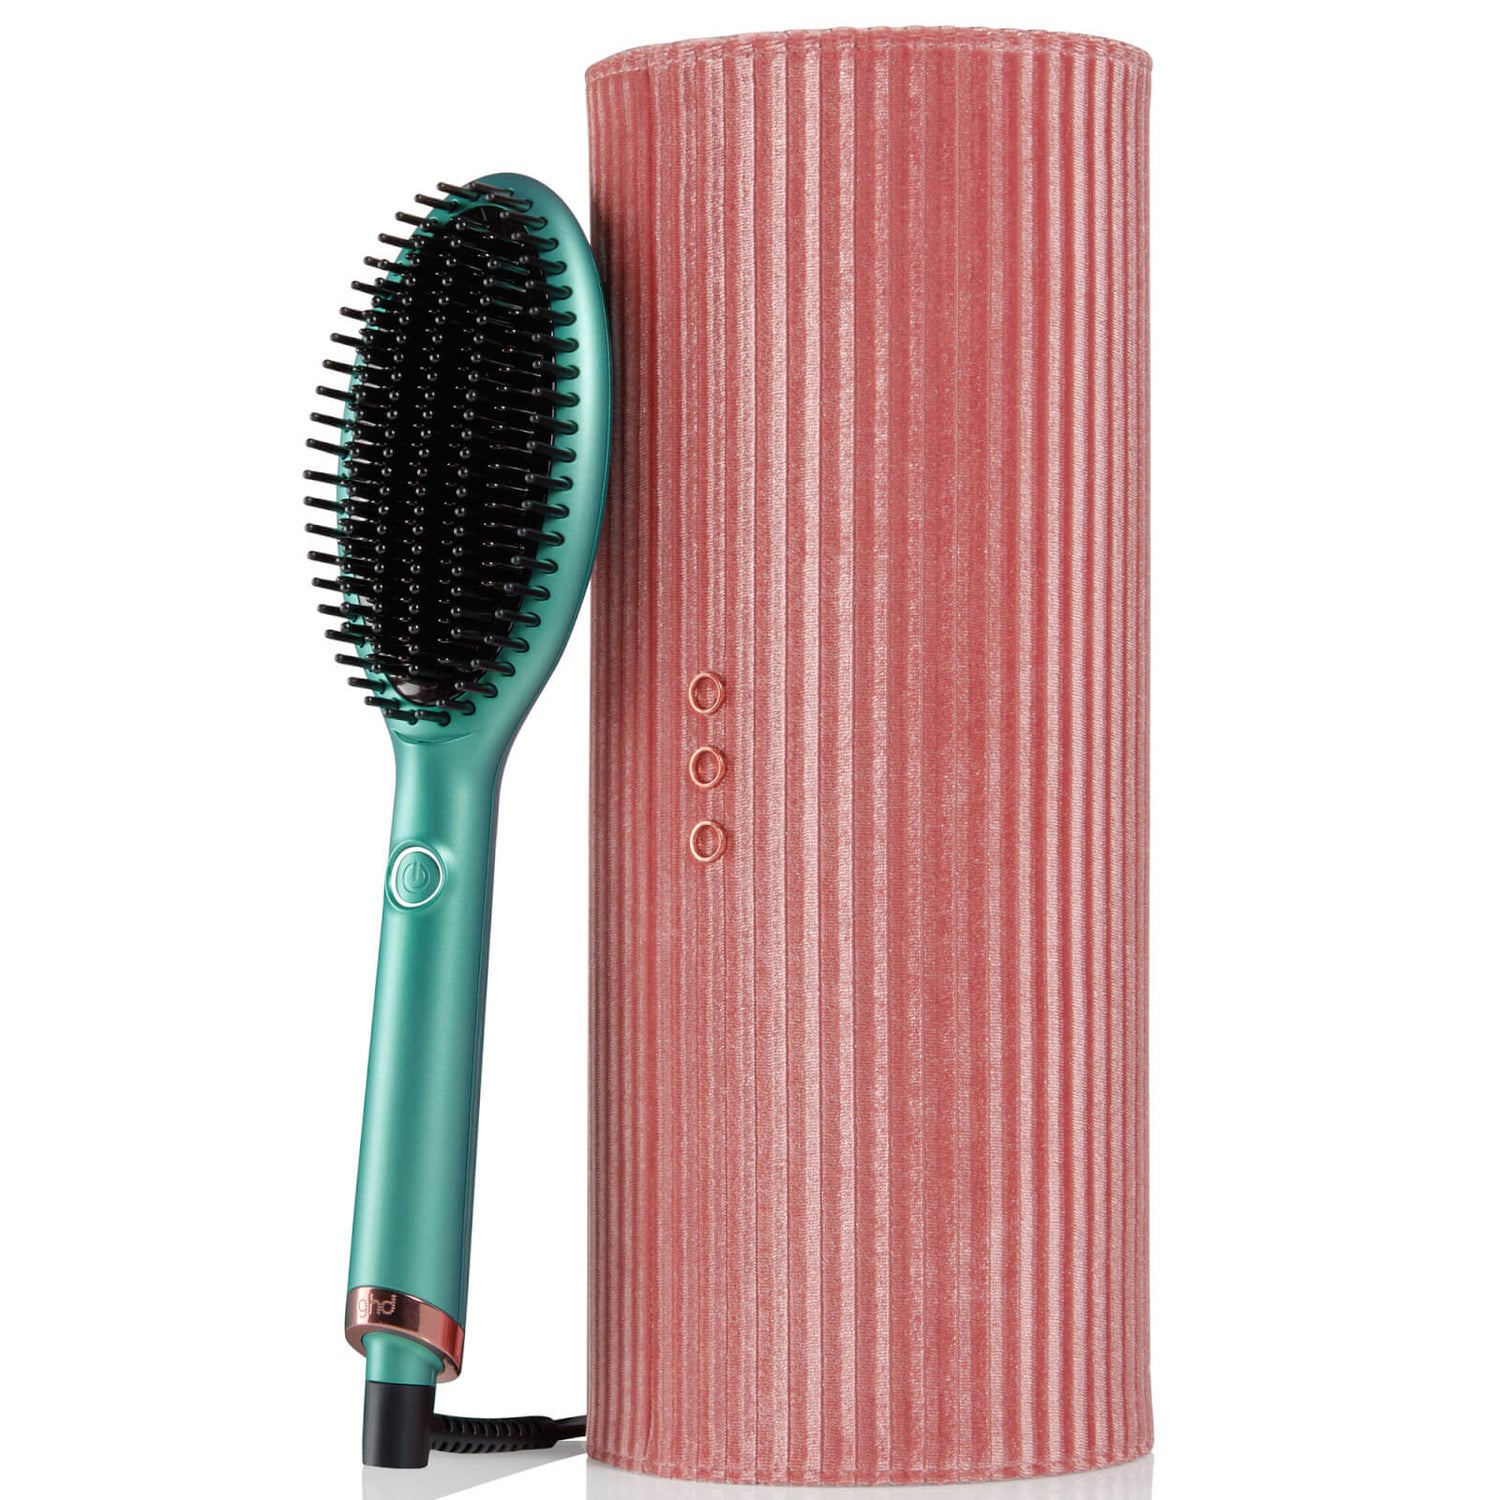 ghd Glide Limited Edition Smoothing Hot Brush - Alluring Jade (Worth £229.00)